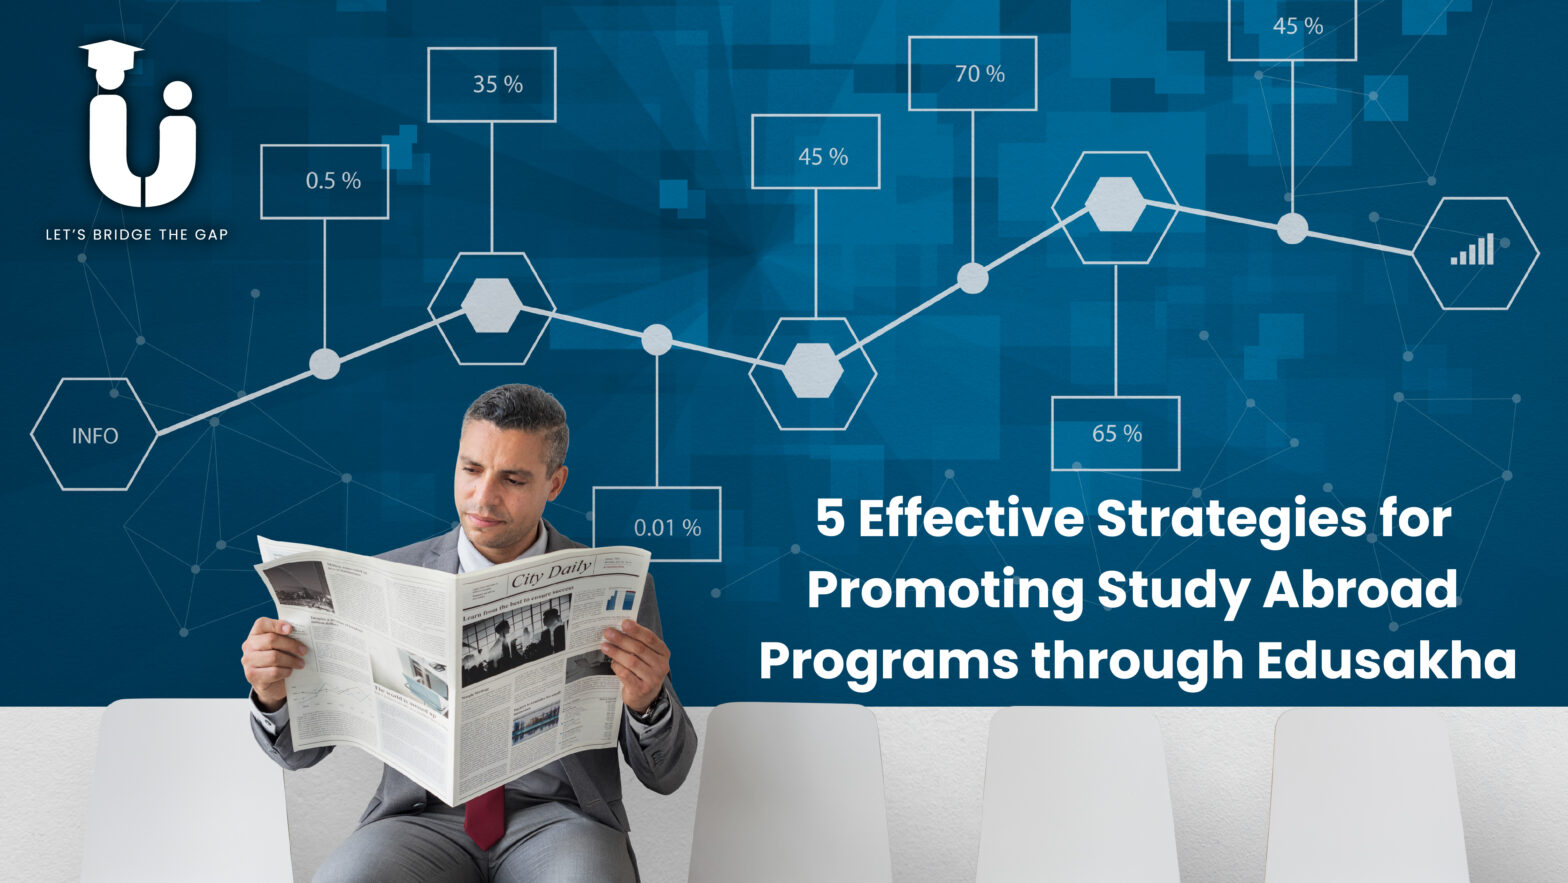 5 Effective Strategies for Promoting Study Abroad Programs through Edusakha